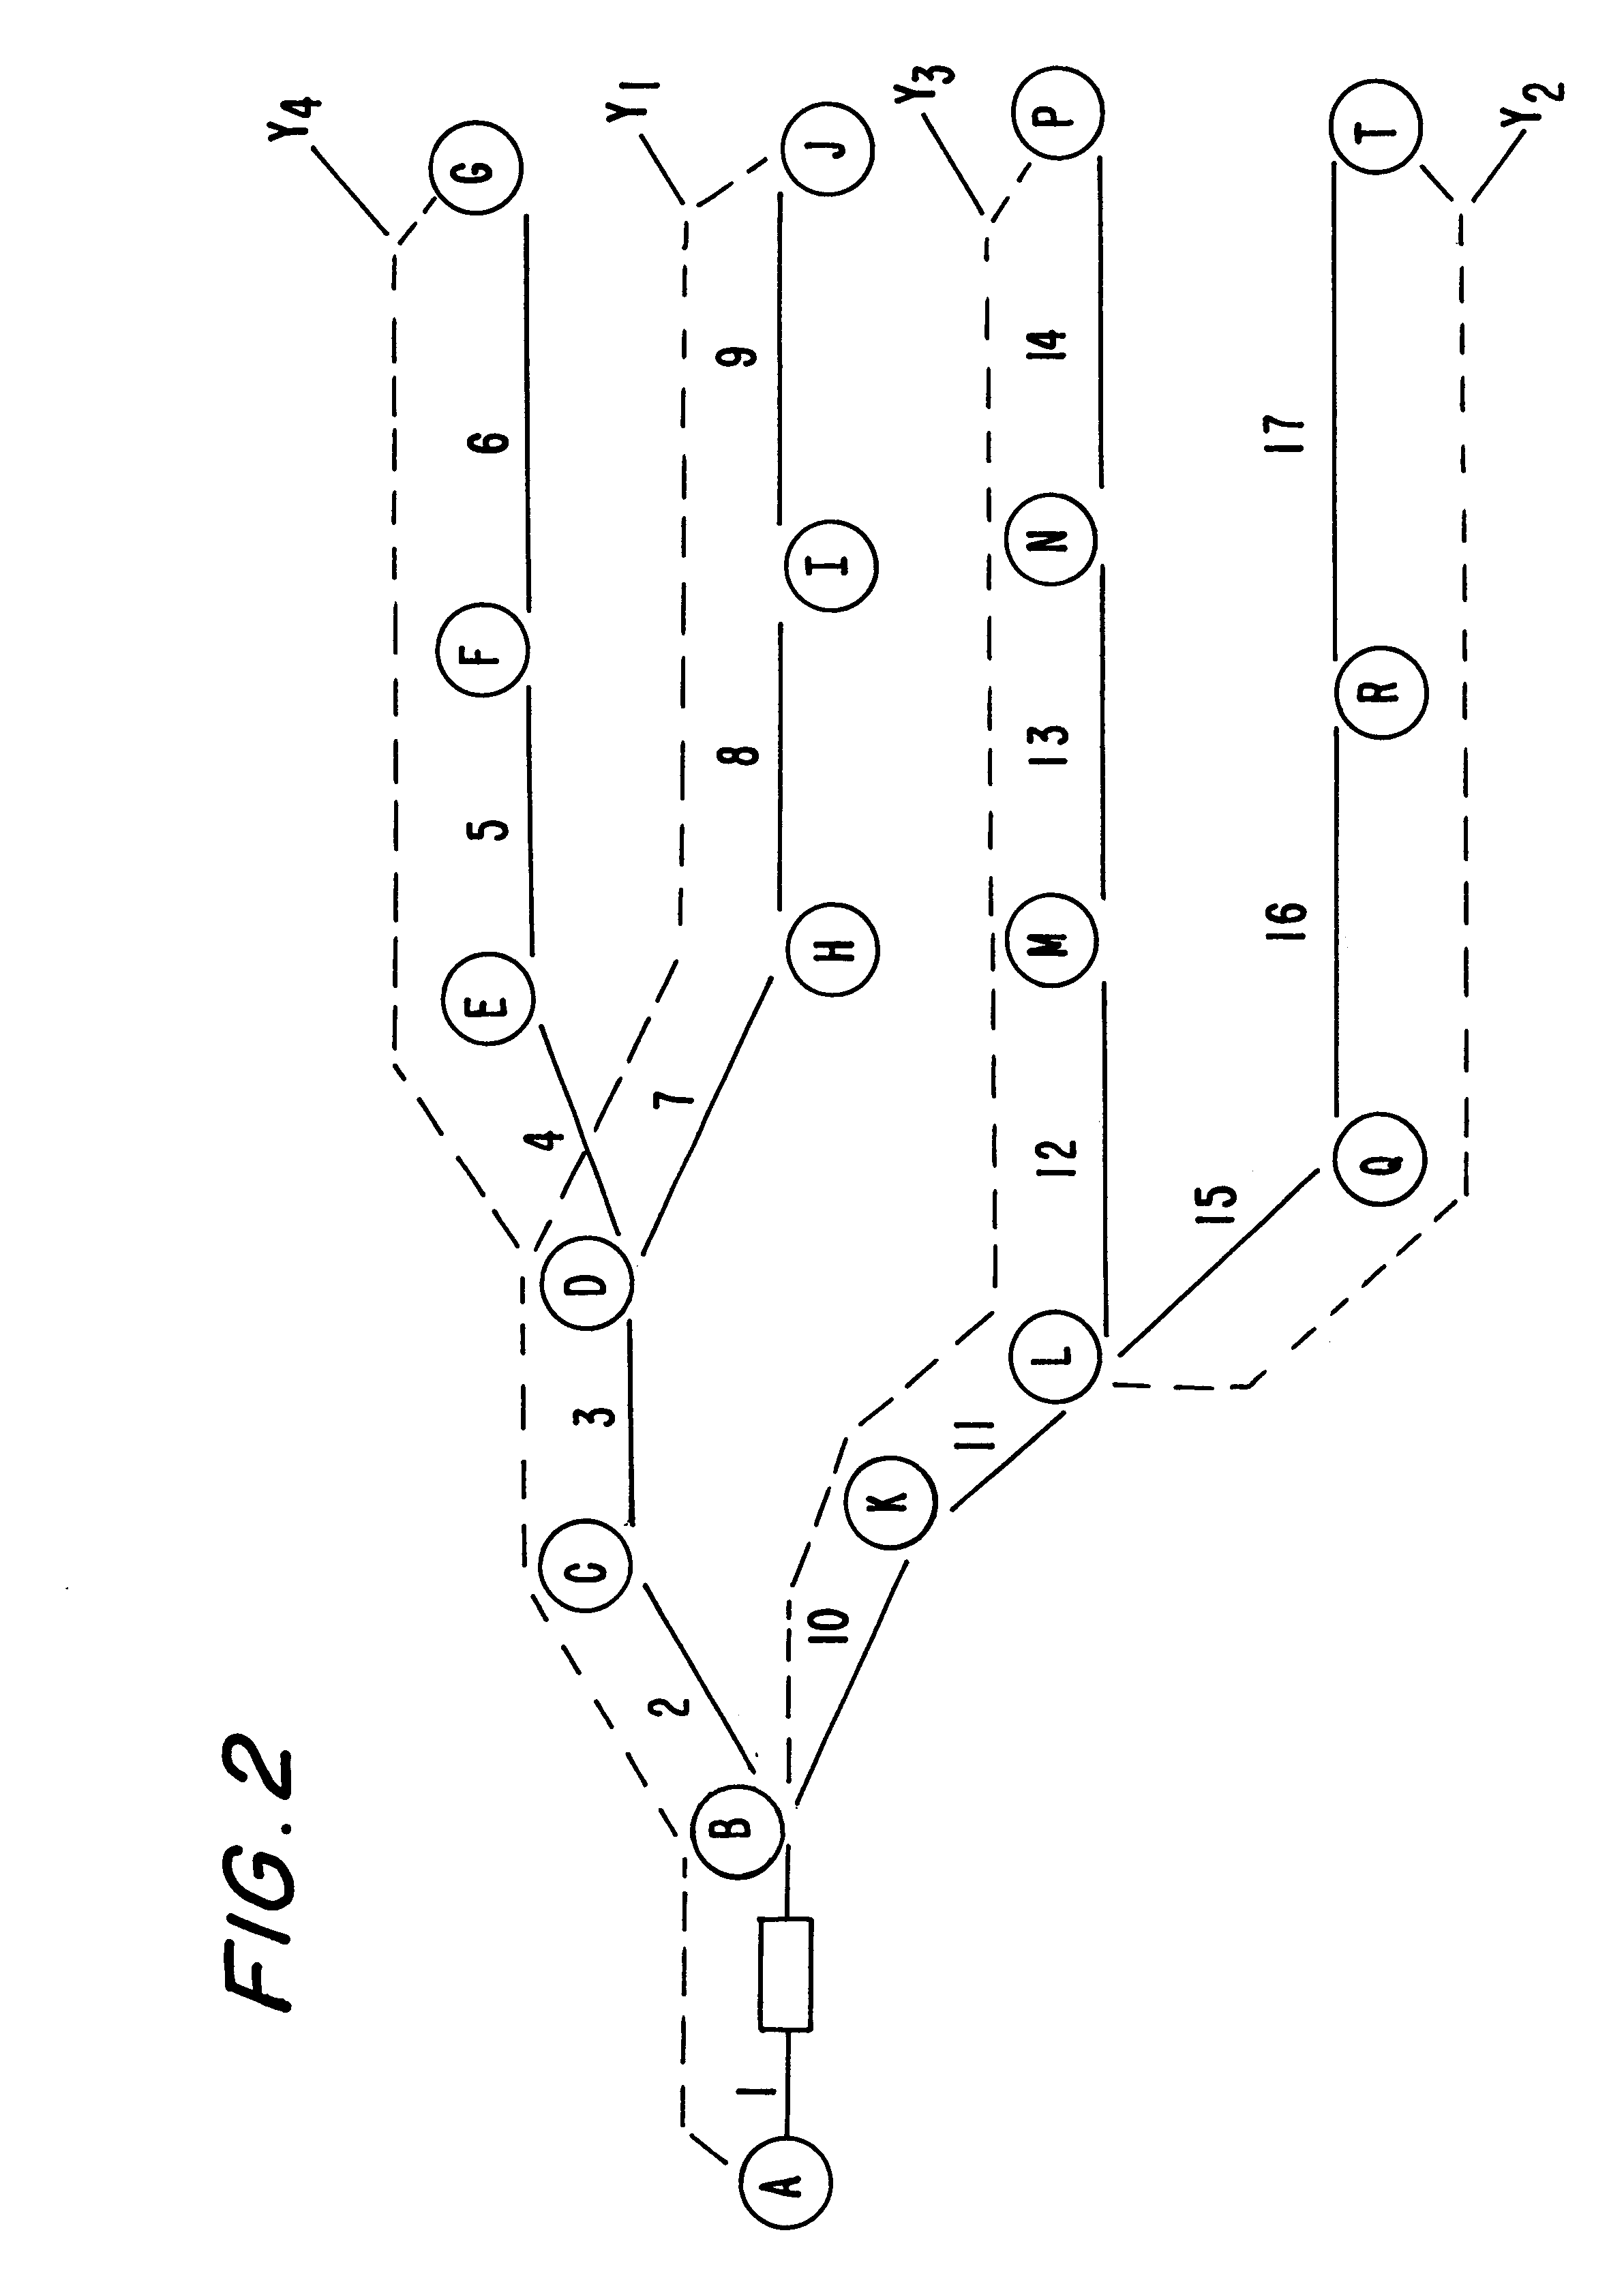 Process and apparatus for transmitting route information and analyzing a traffic network in a vehicular navigation system